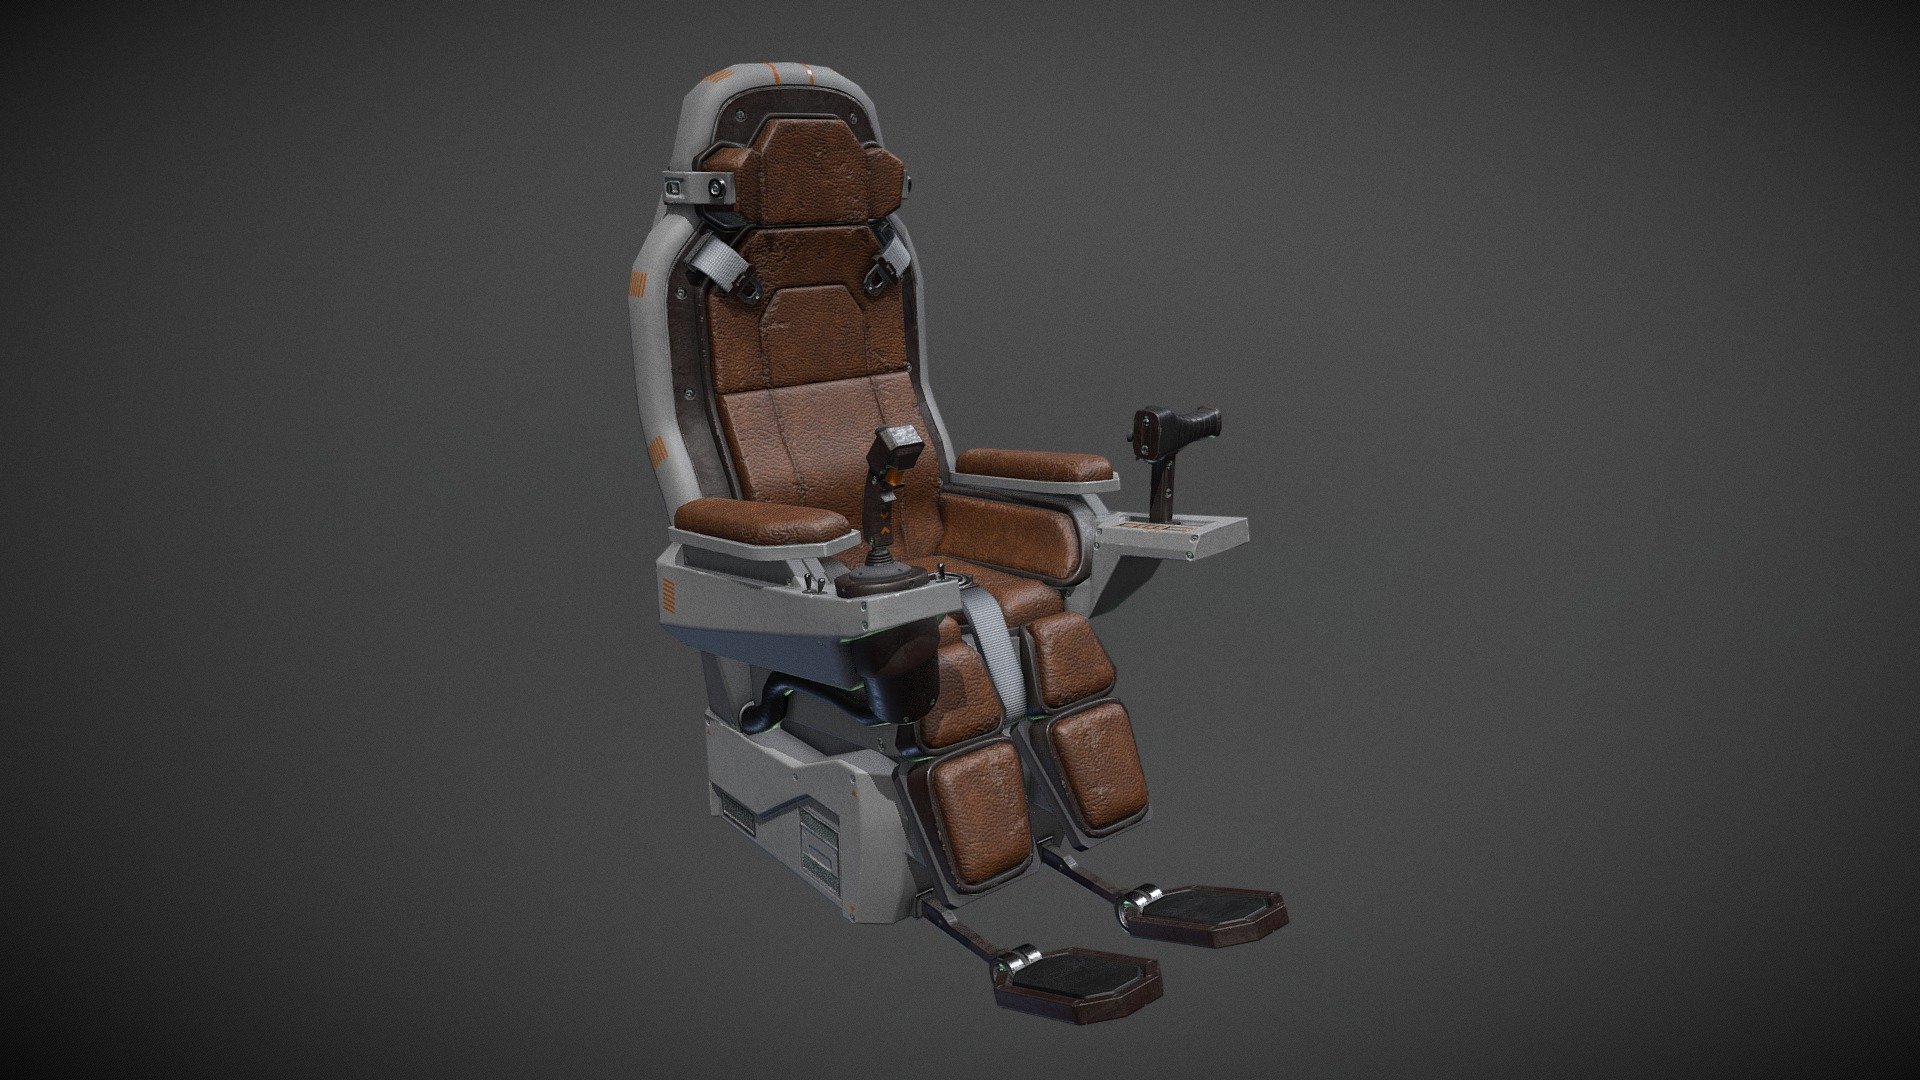 Made Pilot Chair Concept , Used Blender and Substance painter. 

Tries: 13k
Text: 2048
Time: 7 h - Pilot Chair Concept - 3D model by Positivity 3d model